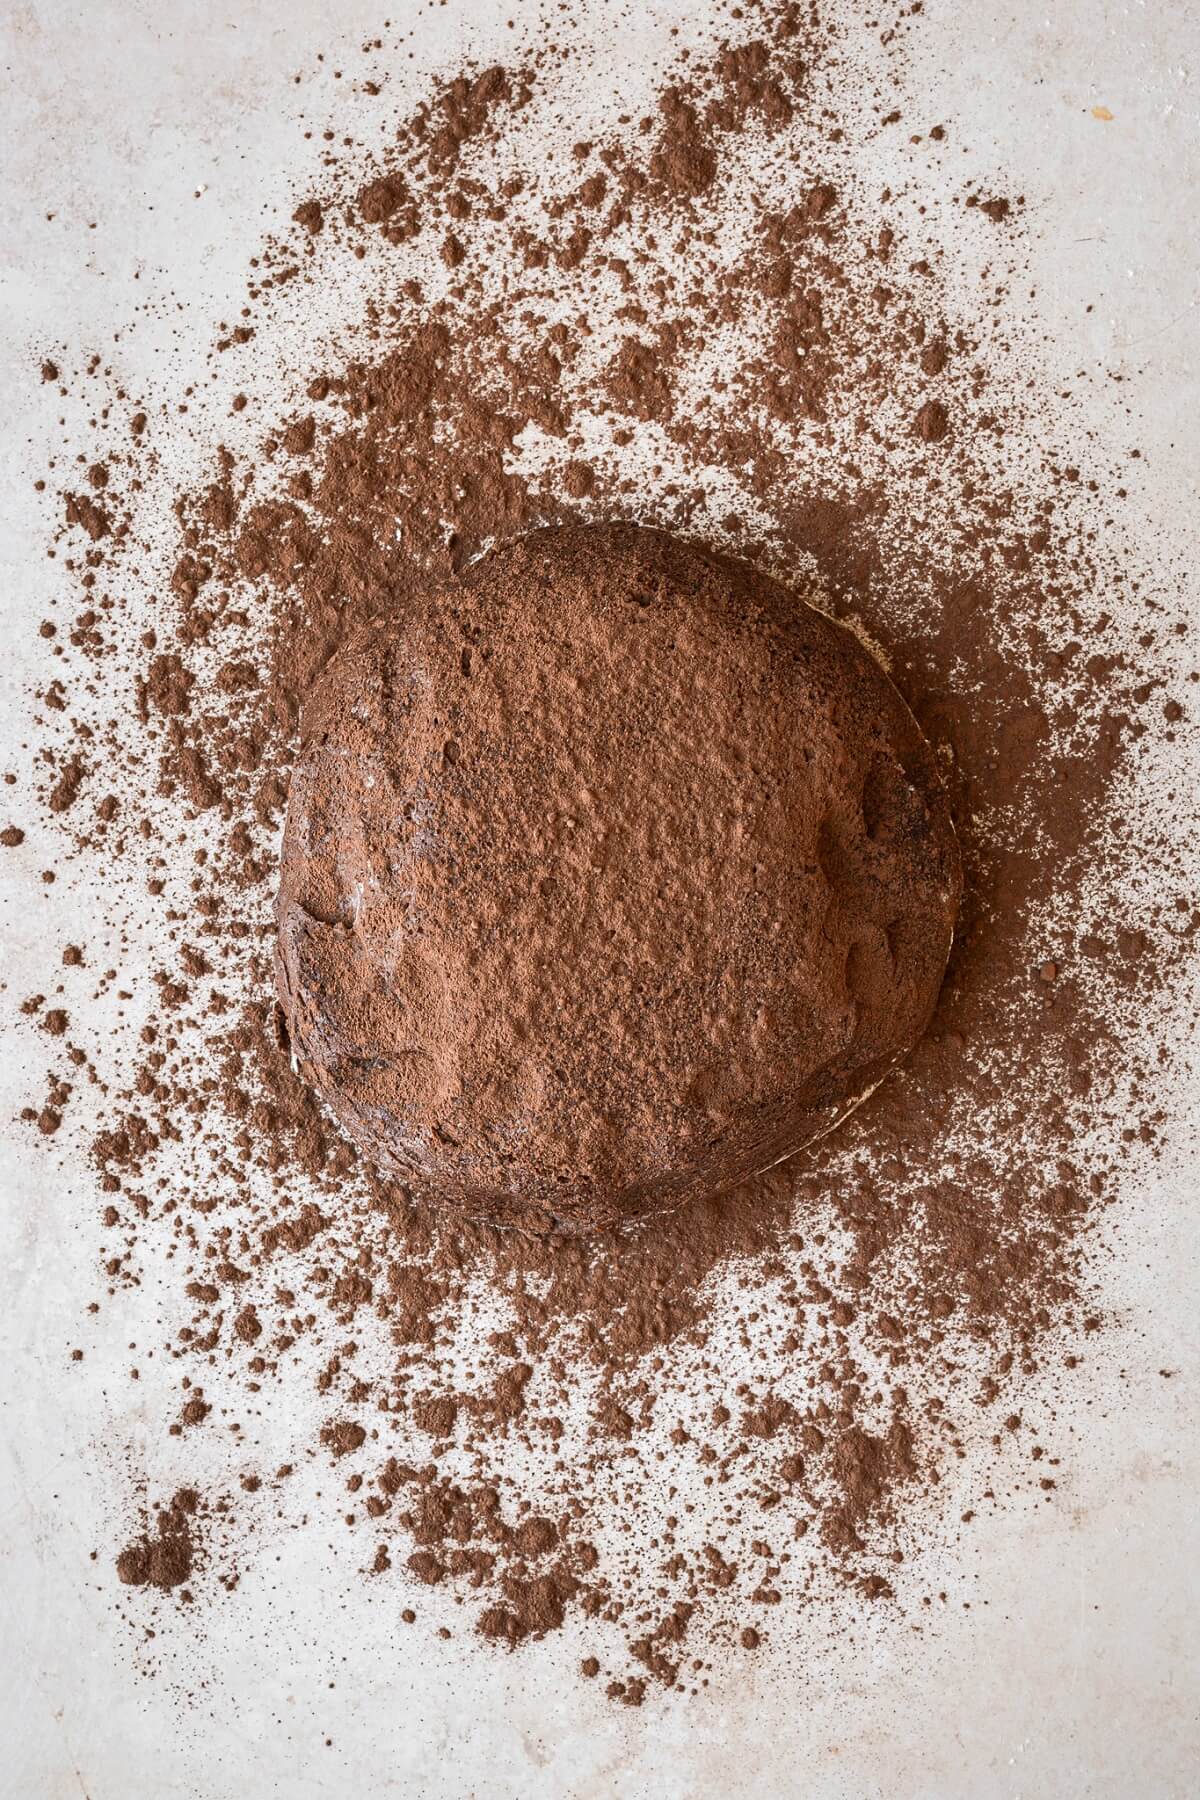 Chocolate yeast dough sprinkled with cocoa powder.